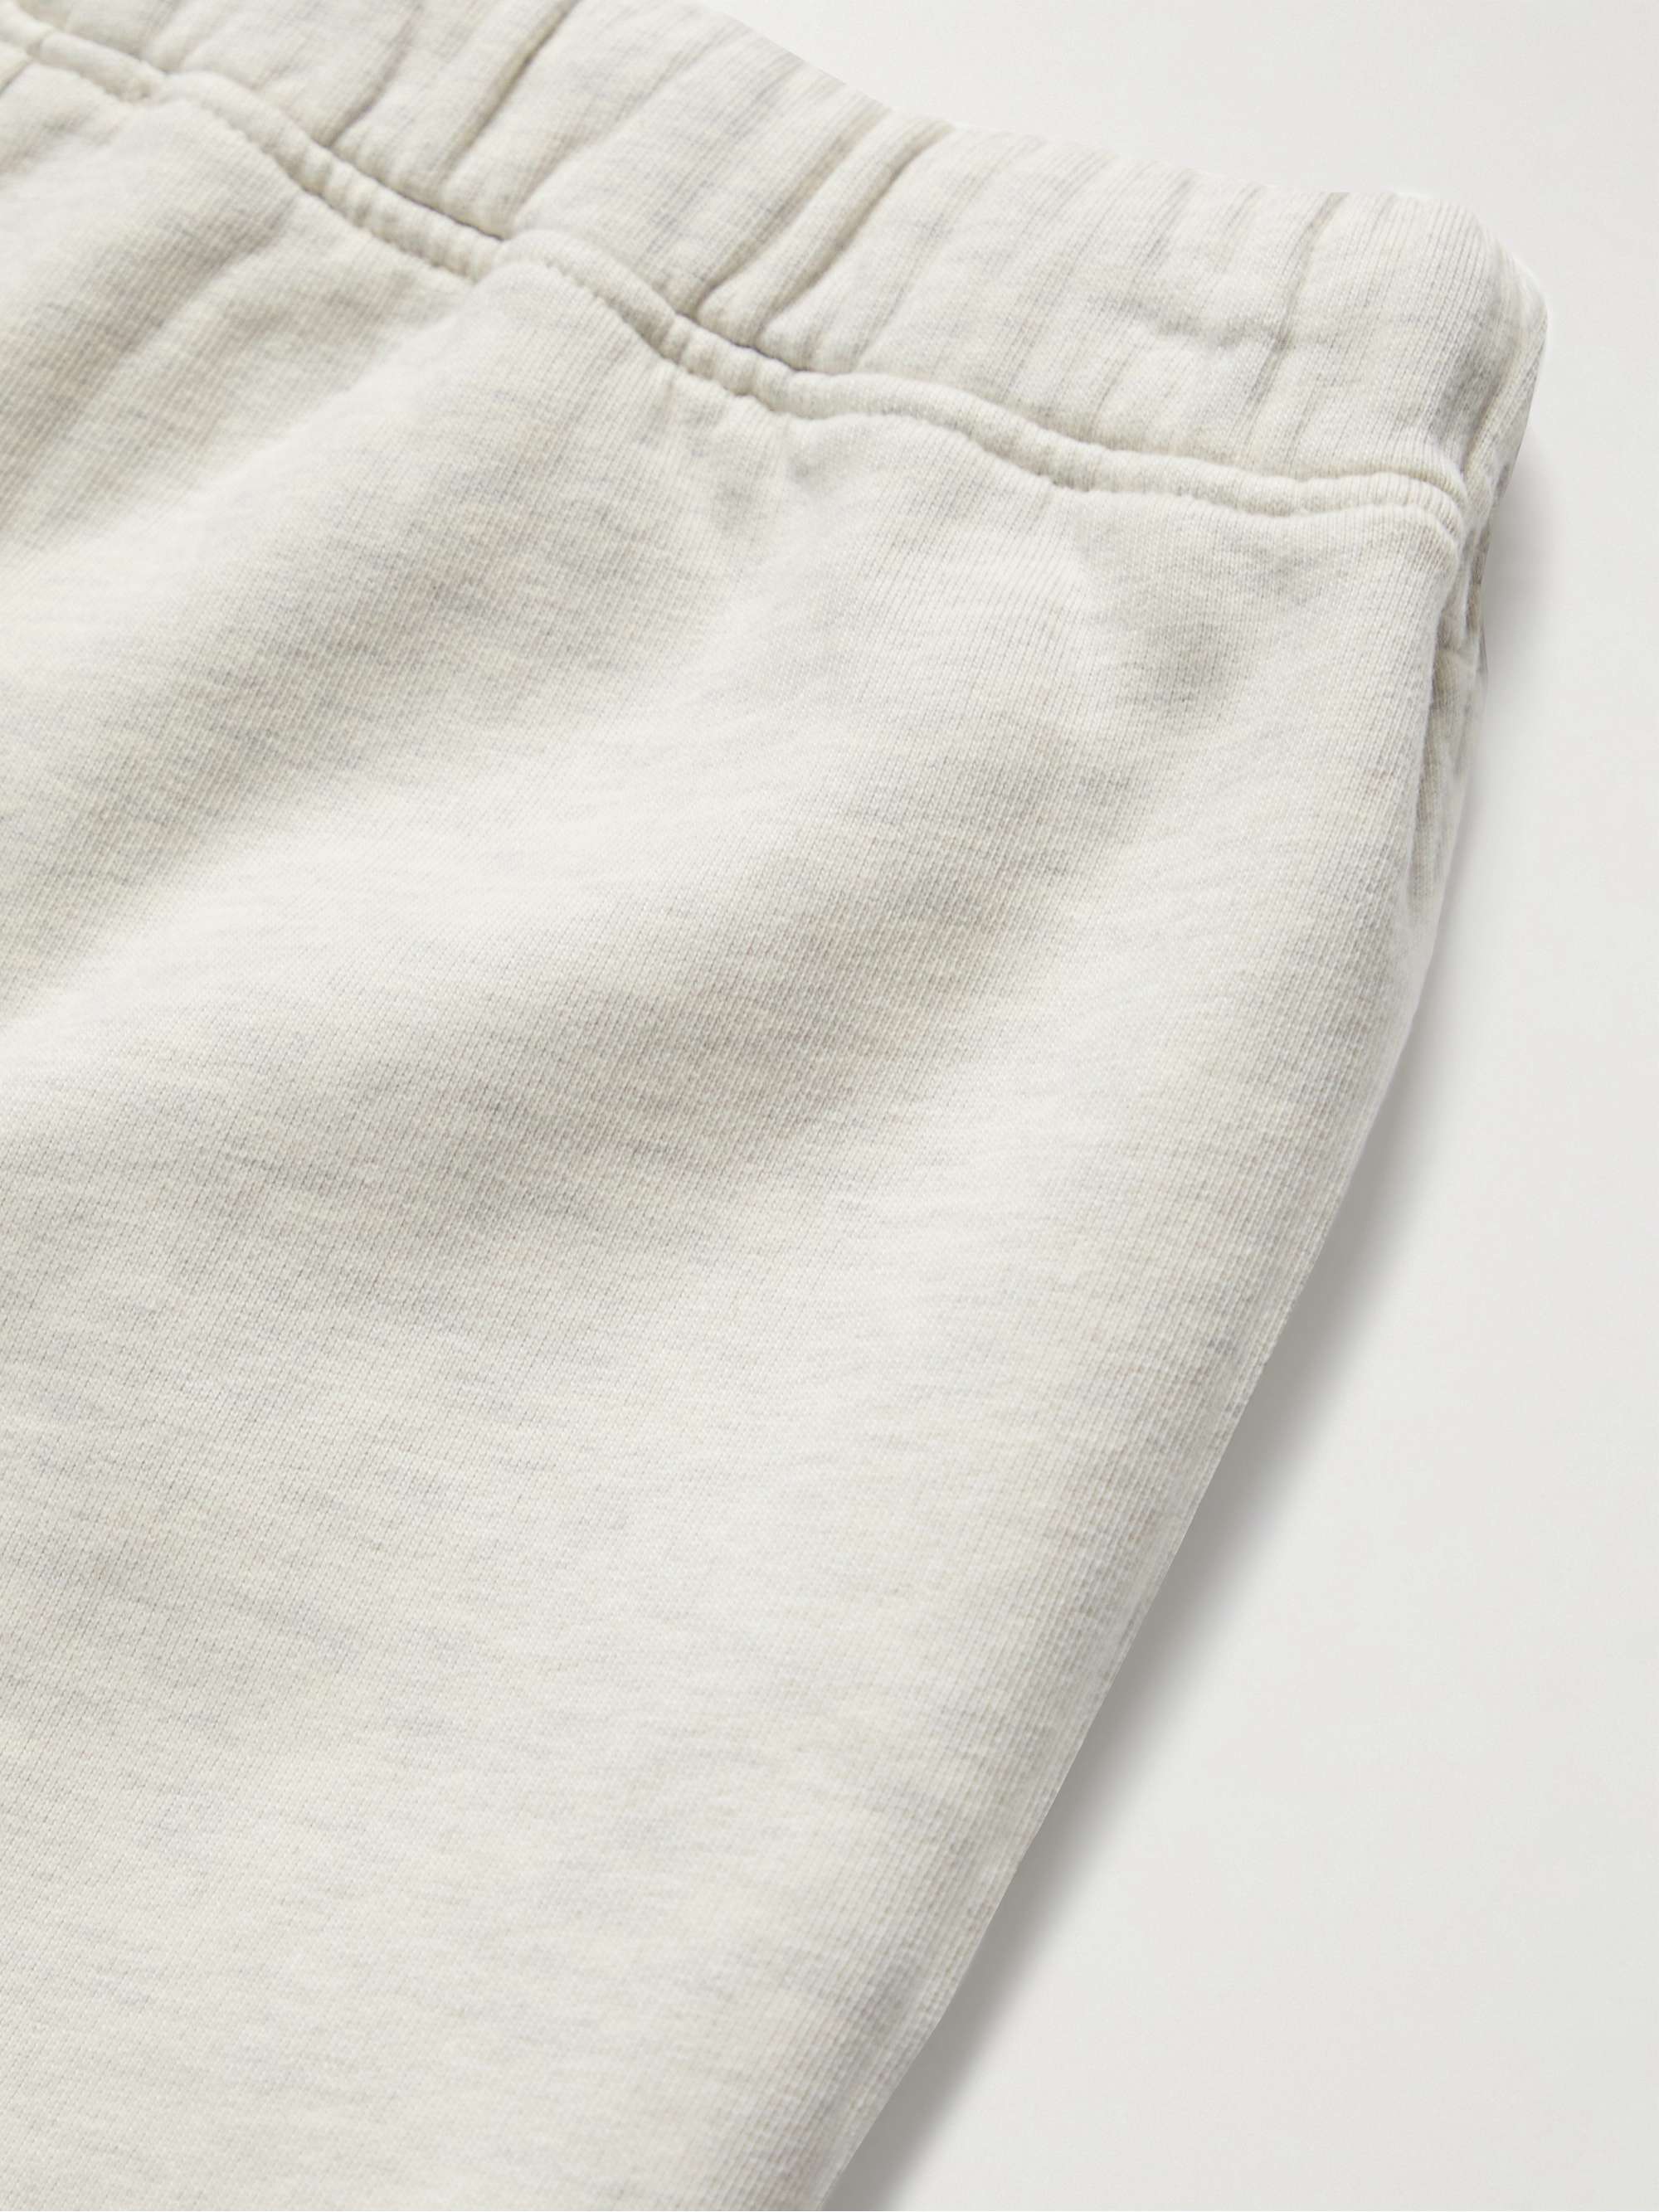 FEAR OF GOD Eternal Tapered Cotton-Jersey Sweatpants